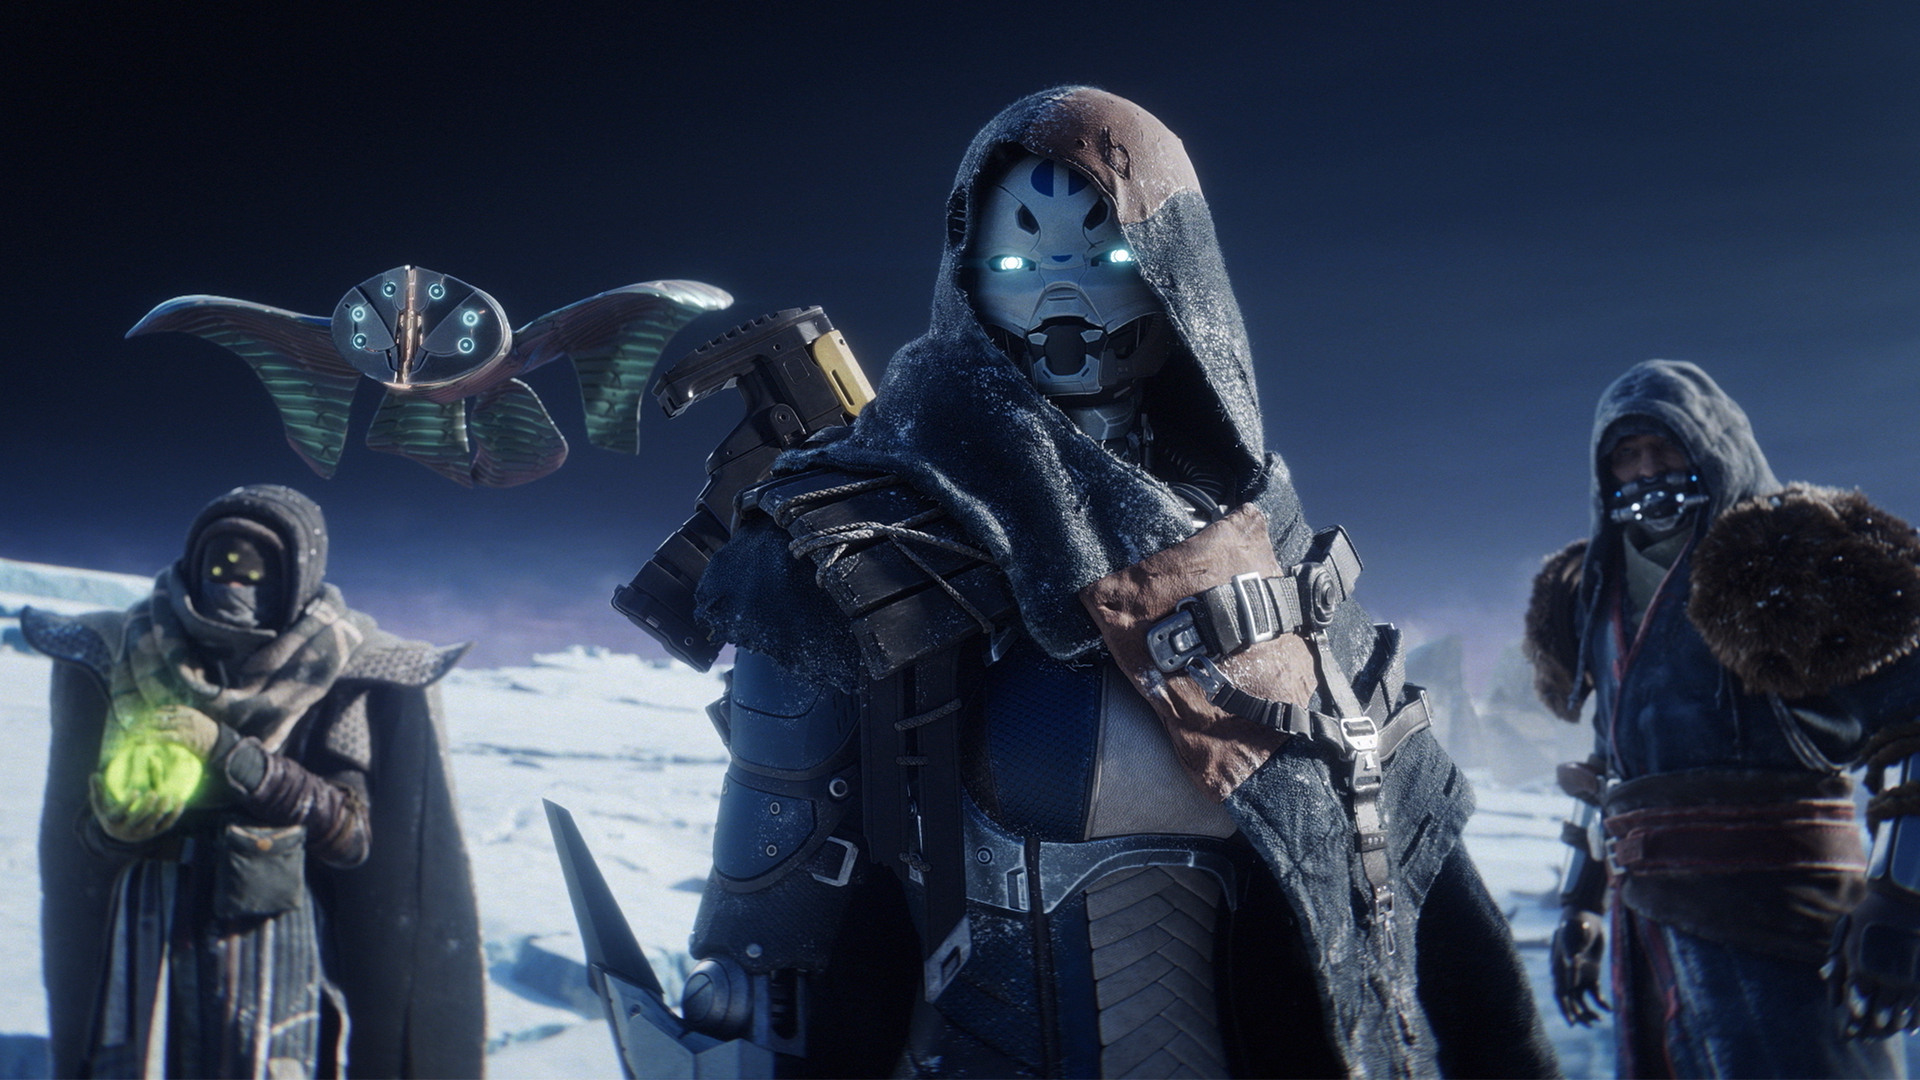 Destiny 2 Will Take Players To Europa, A New Location, To Combat The Darkness-Wielding Eramis.